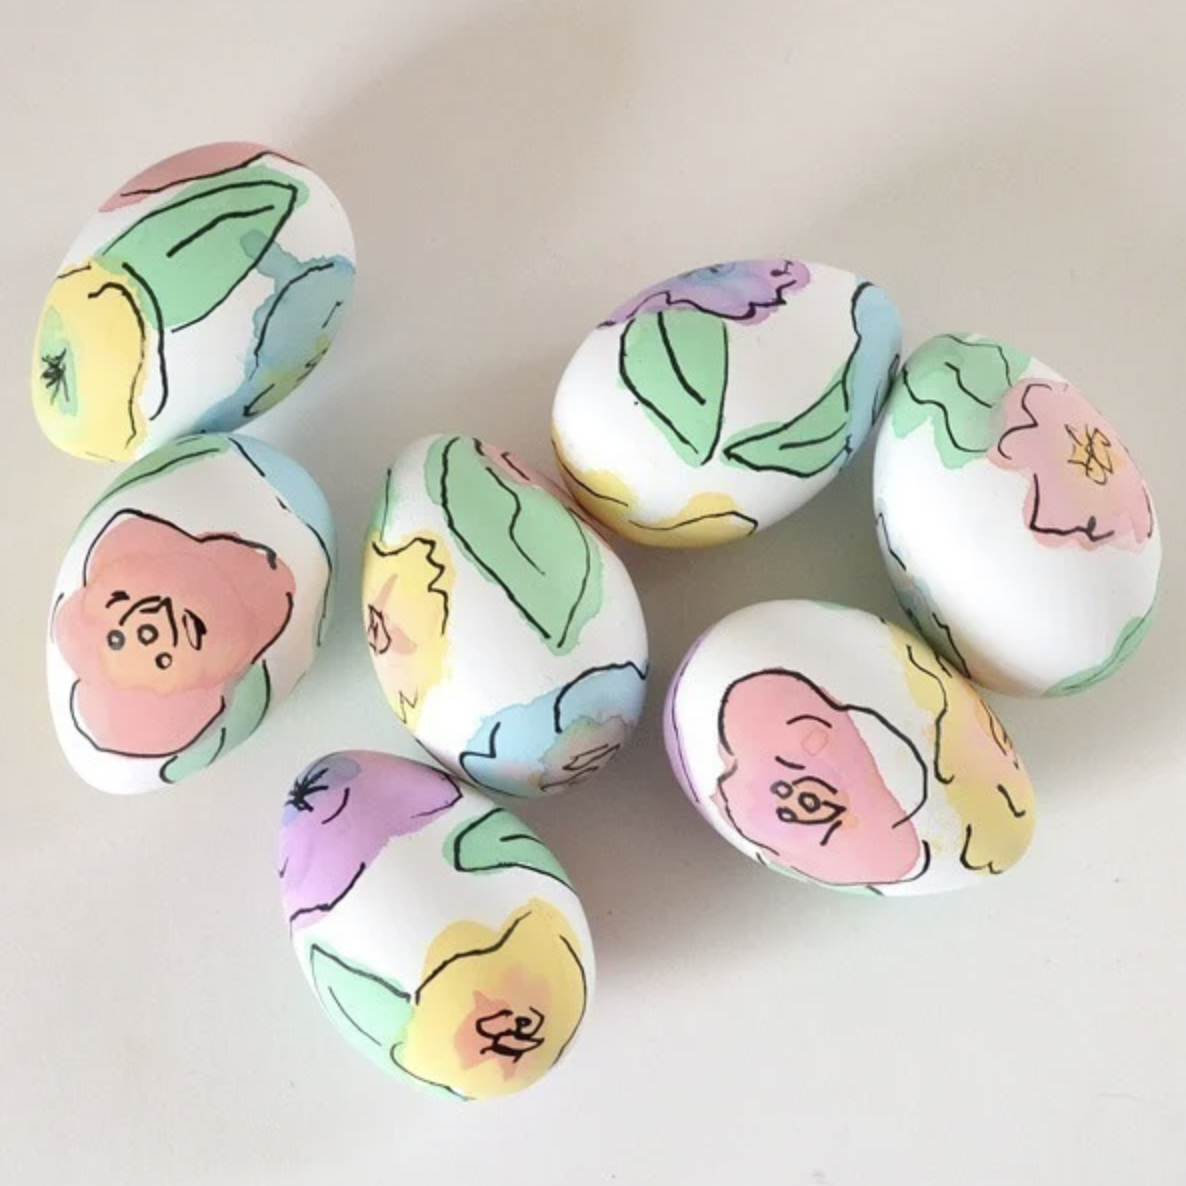 <p>Darling floral designs in the prettiest pastel hues are what springtime dreams are made of! You can copy them yourself with liquid food coloring and black sharpie marker. </p><p><strong>Get the tutorial at <a href="https://www.dreamalittlebigger.com/post/floral-eggs-easter.html">Dream A Little Bigger</a>.</strong></p>